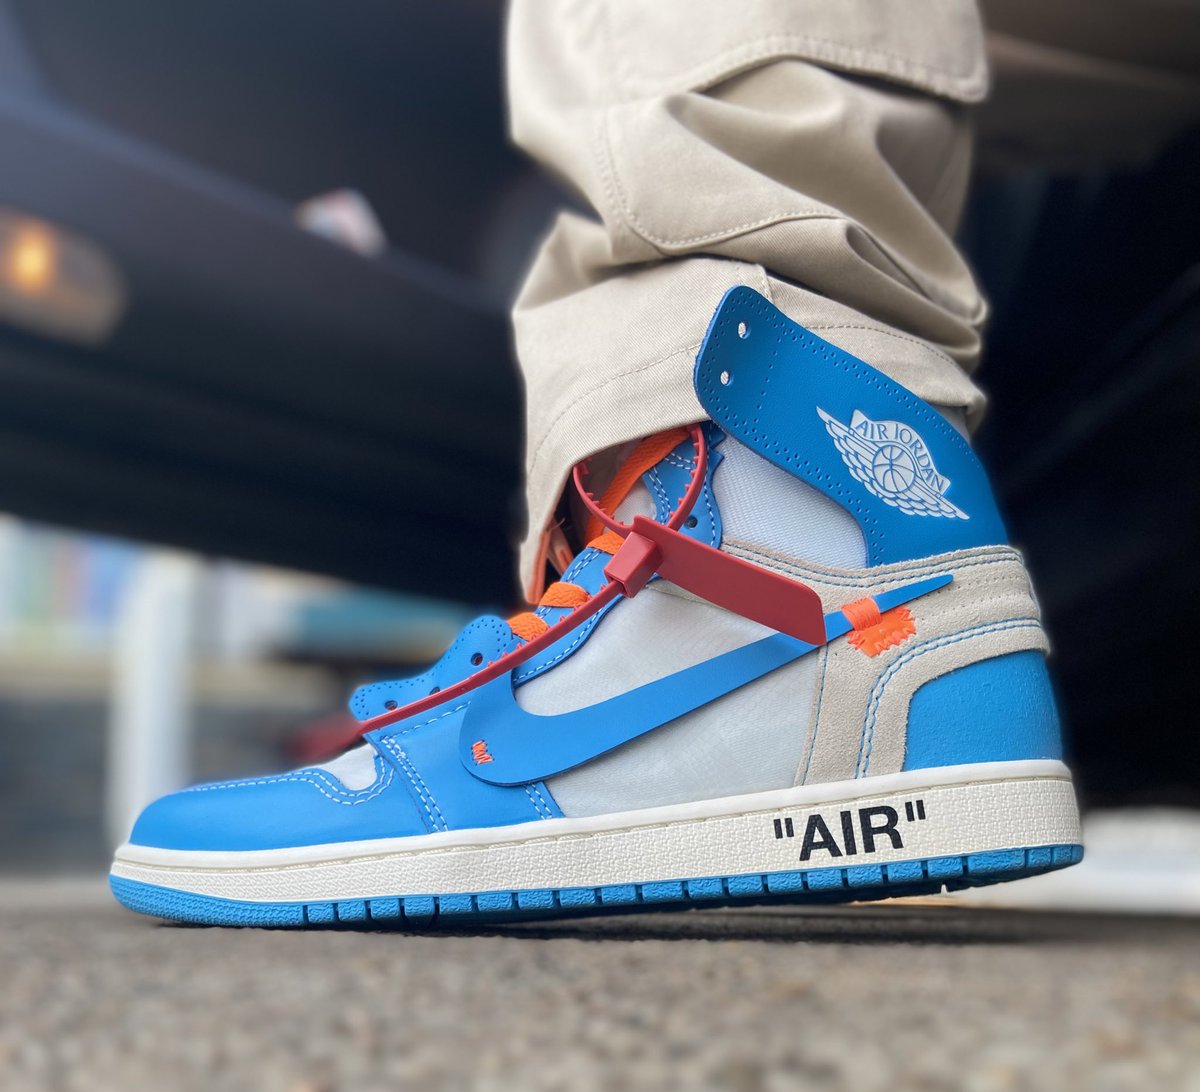 #KOTD #UnDs #GrailDay #ItsMySoberBDay AIR JORDAN 1 x OFF WHITE “UNC” 

3 years ago today I made the decision to never touch another substance. No heroin, no pills , no weed, no alcohol, NOTHING. Today, I can say I still have not touched anything since. To God, I am truly grateful